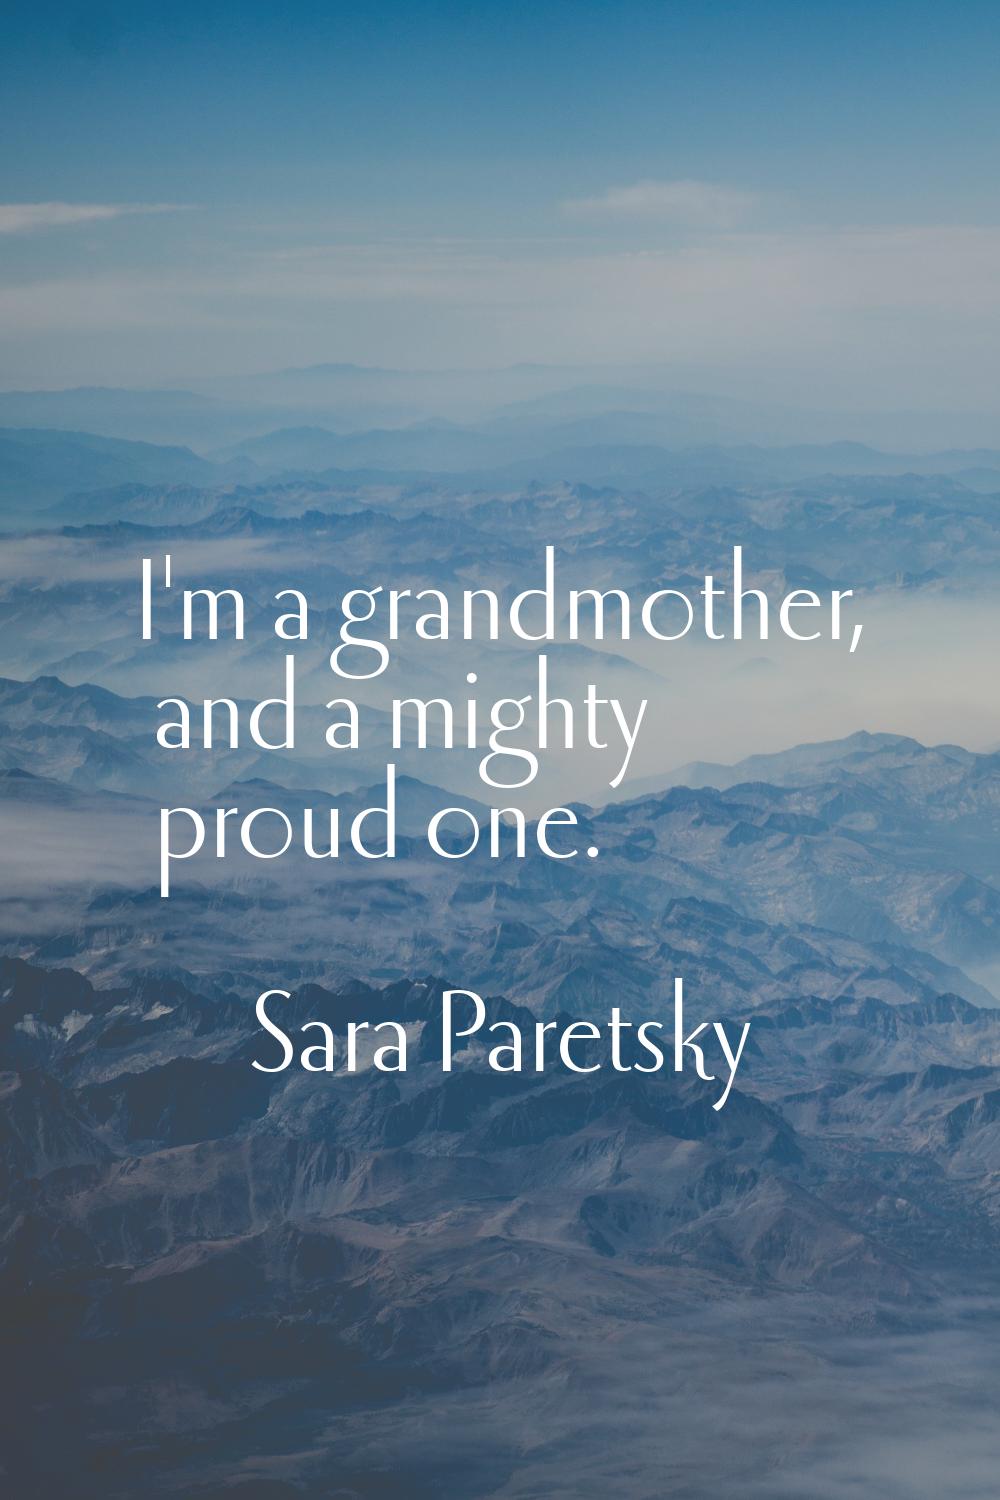 I'm a grandmother, and a mighty proud one.